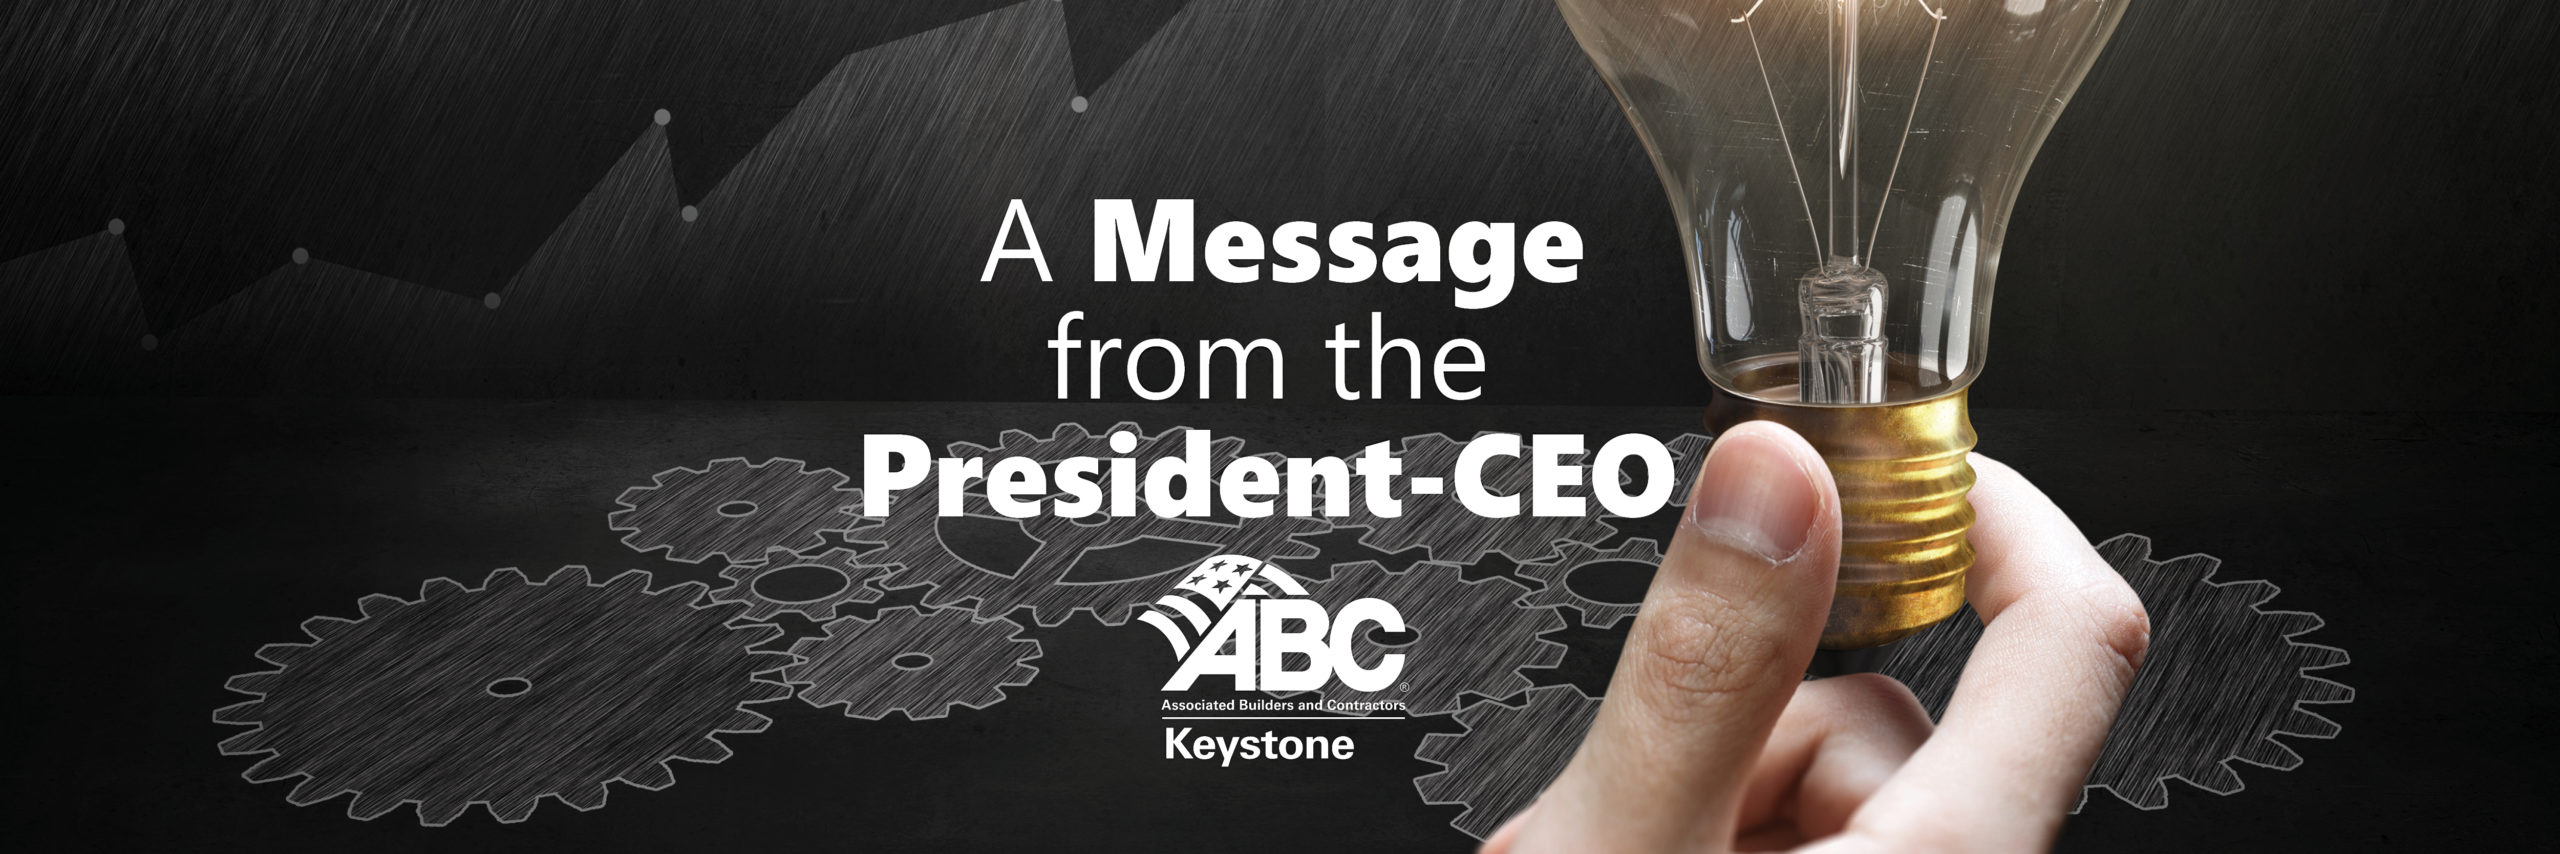 A Message from ABC Keystone President-CEO